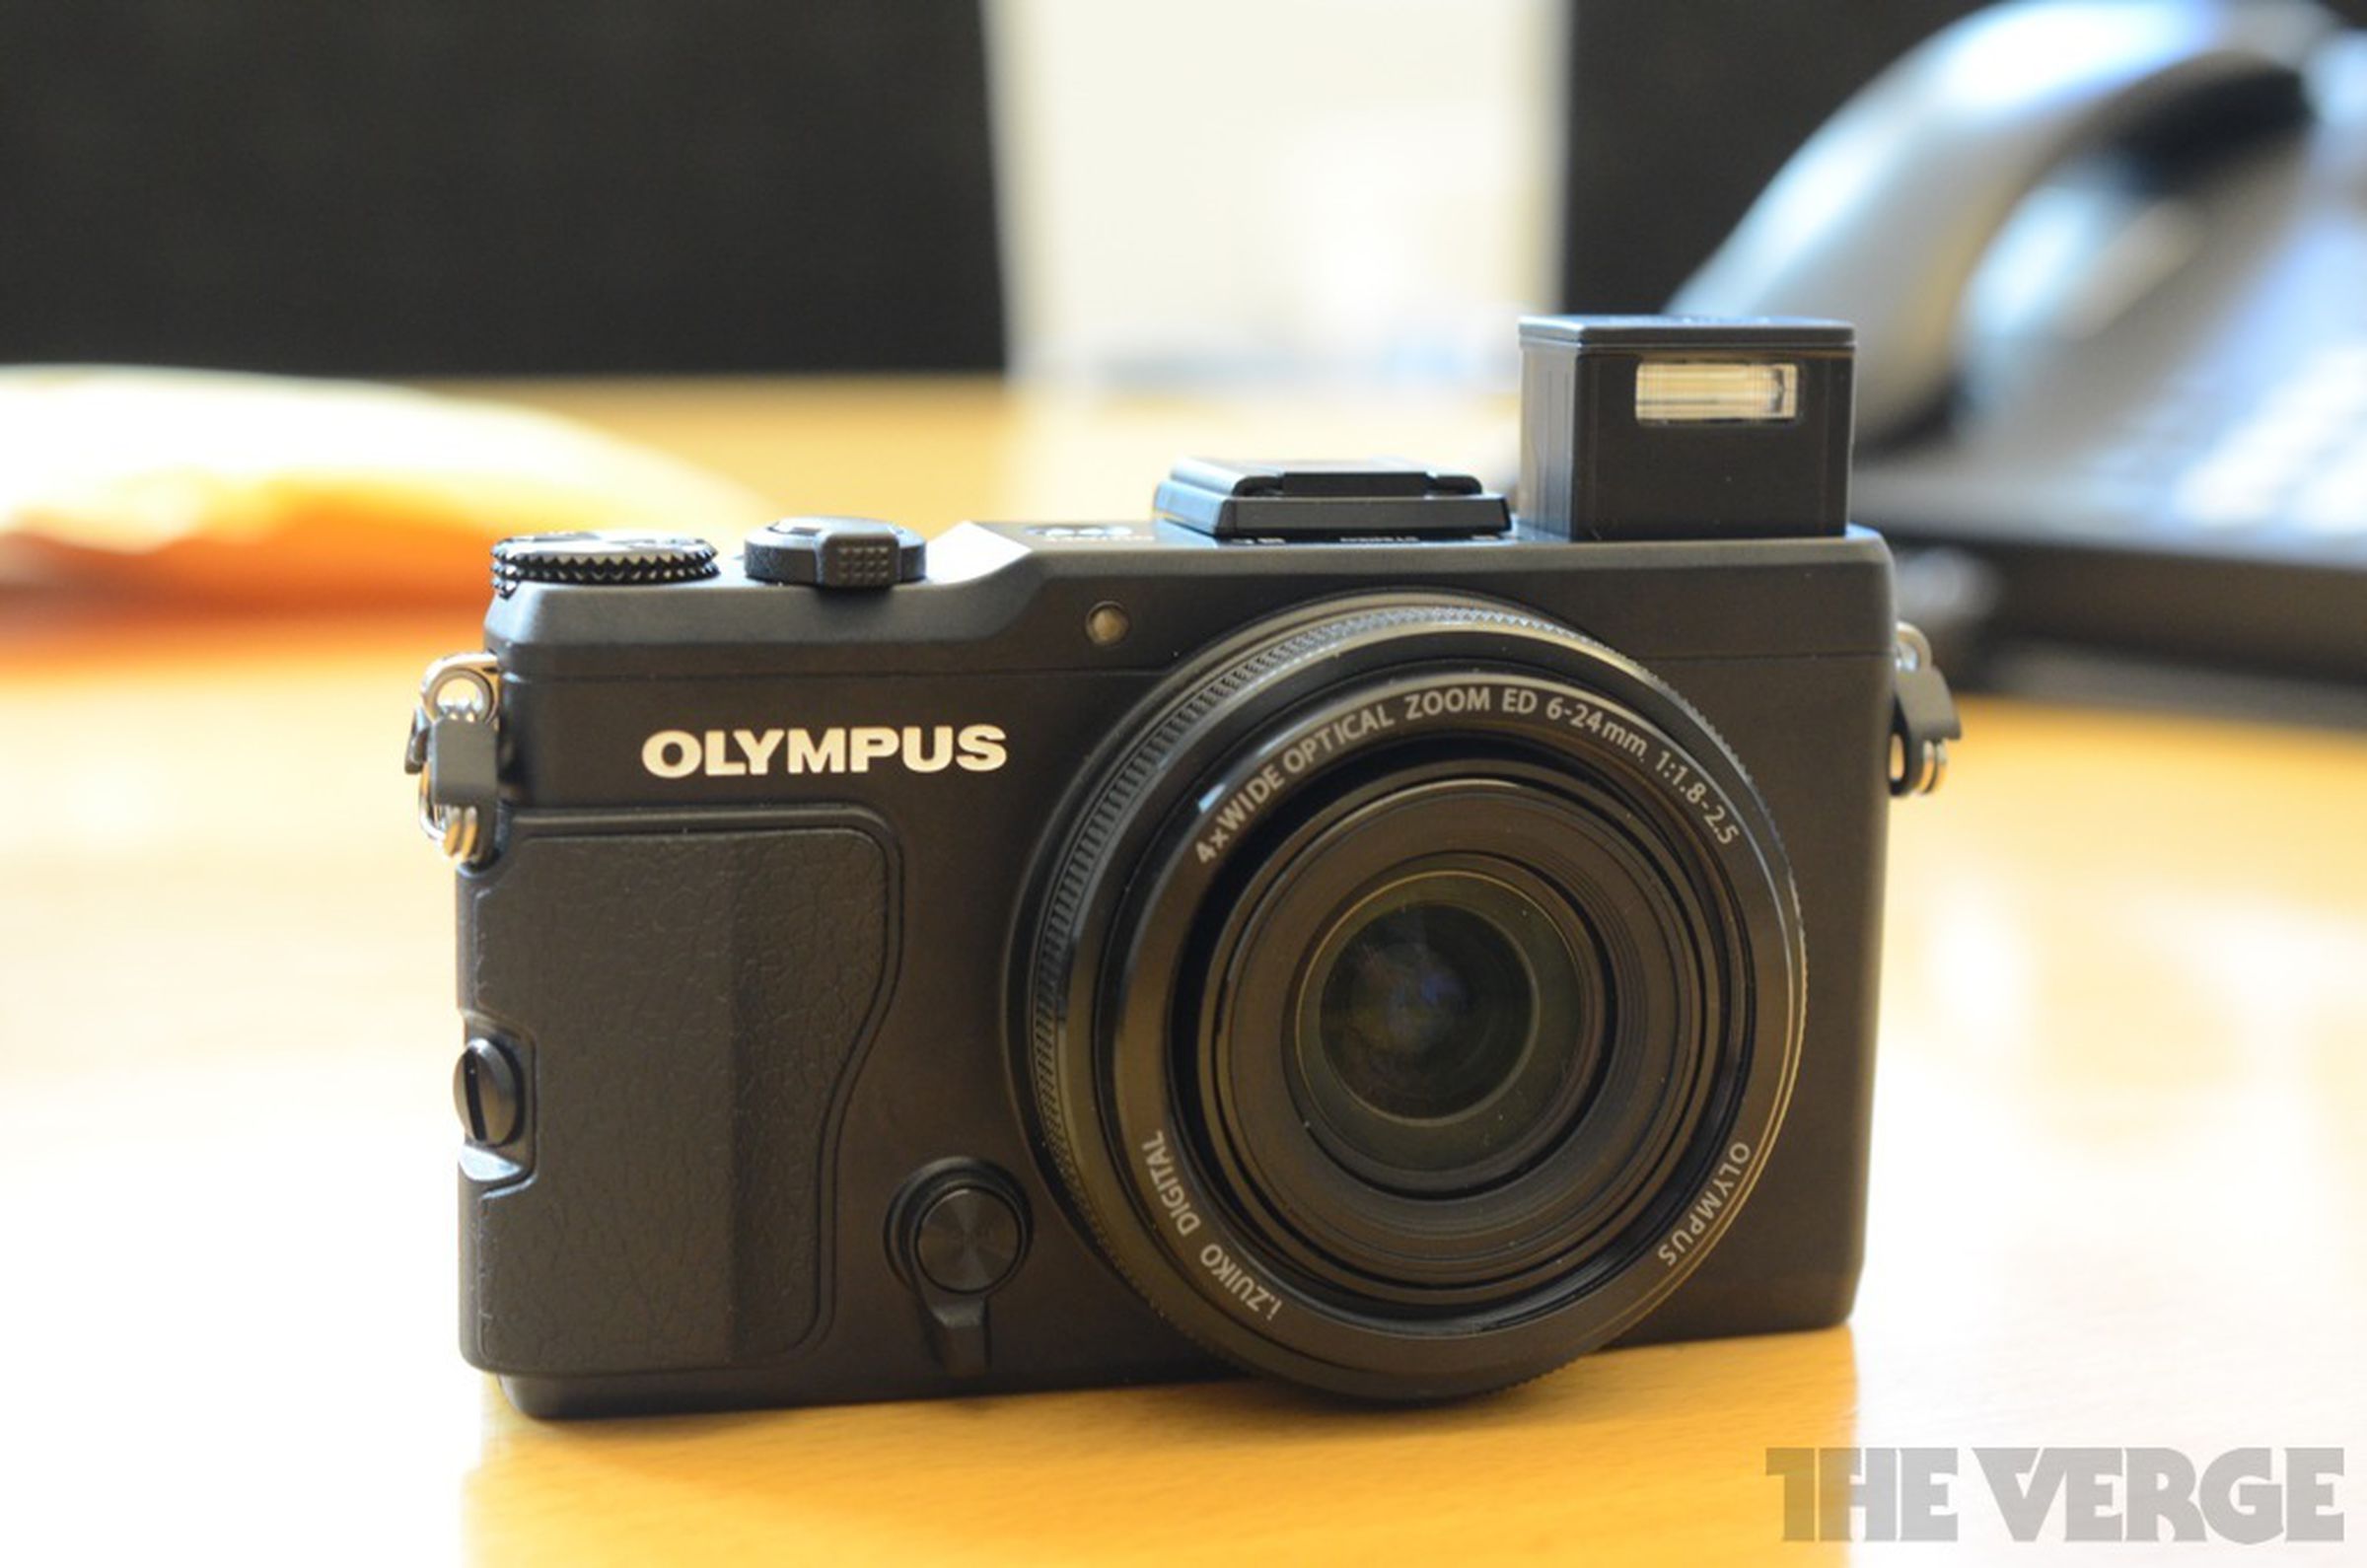 Olympus E-PL5, E-PM2, and XZ-2 pictures